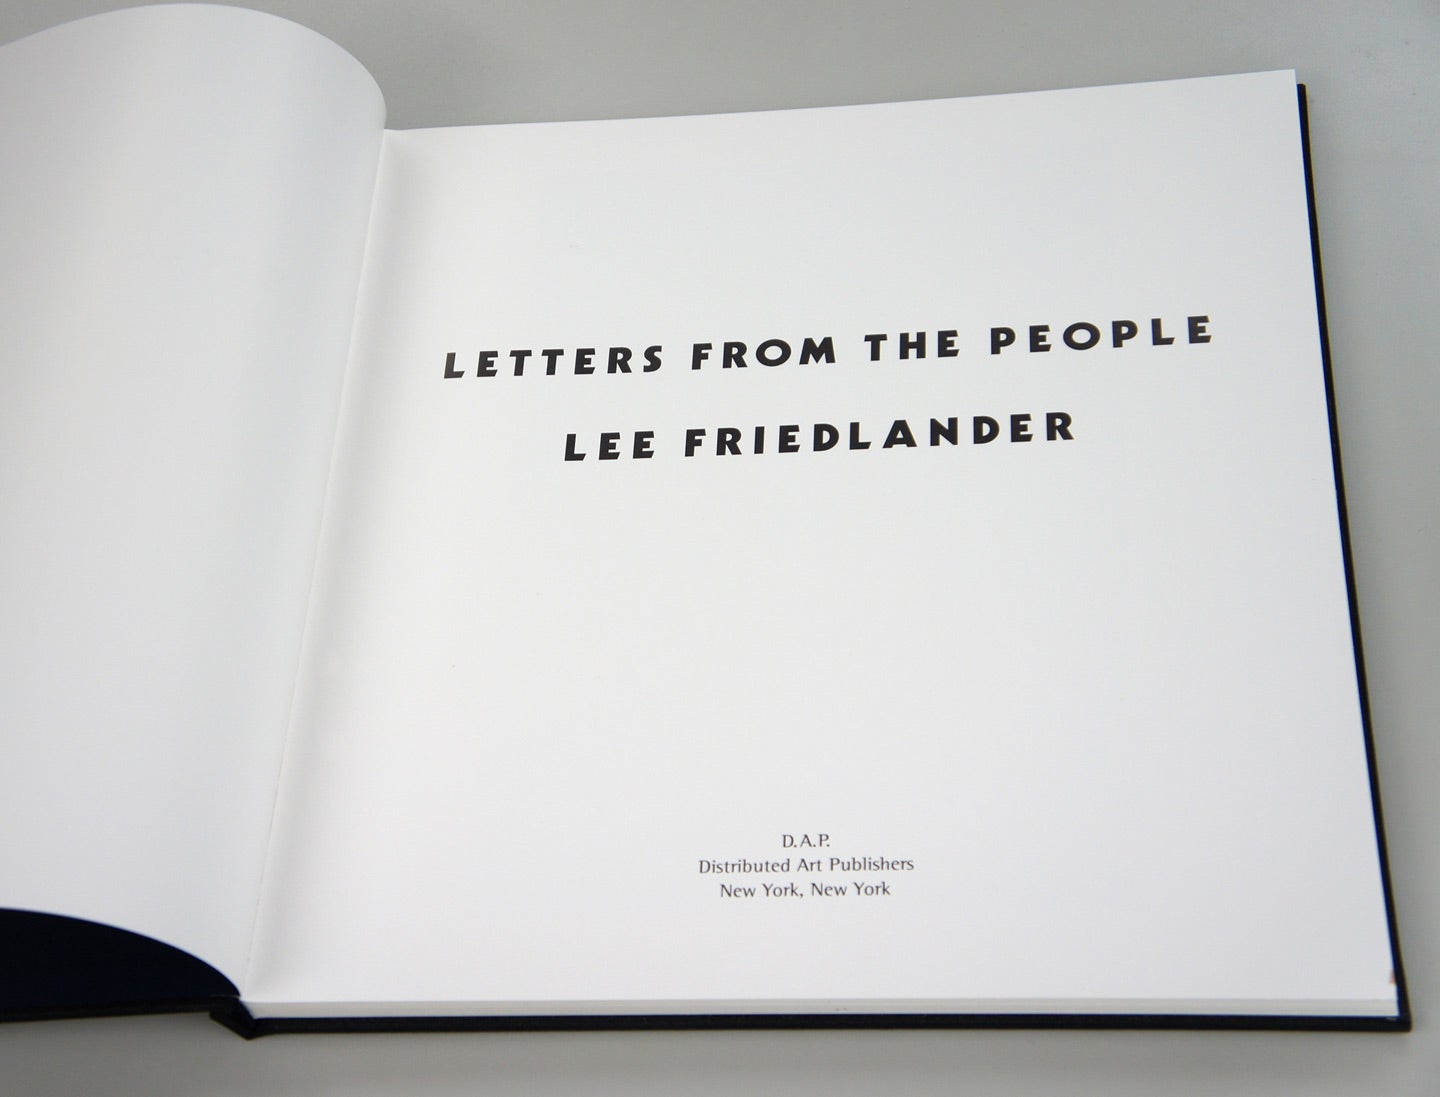 Lee Friedlander: Letters from the People (Special Limited Edition with One Vintage Gelatin Silver Print: "R")